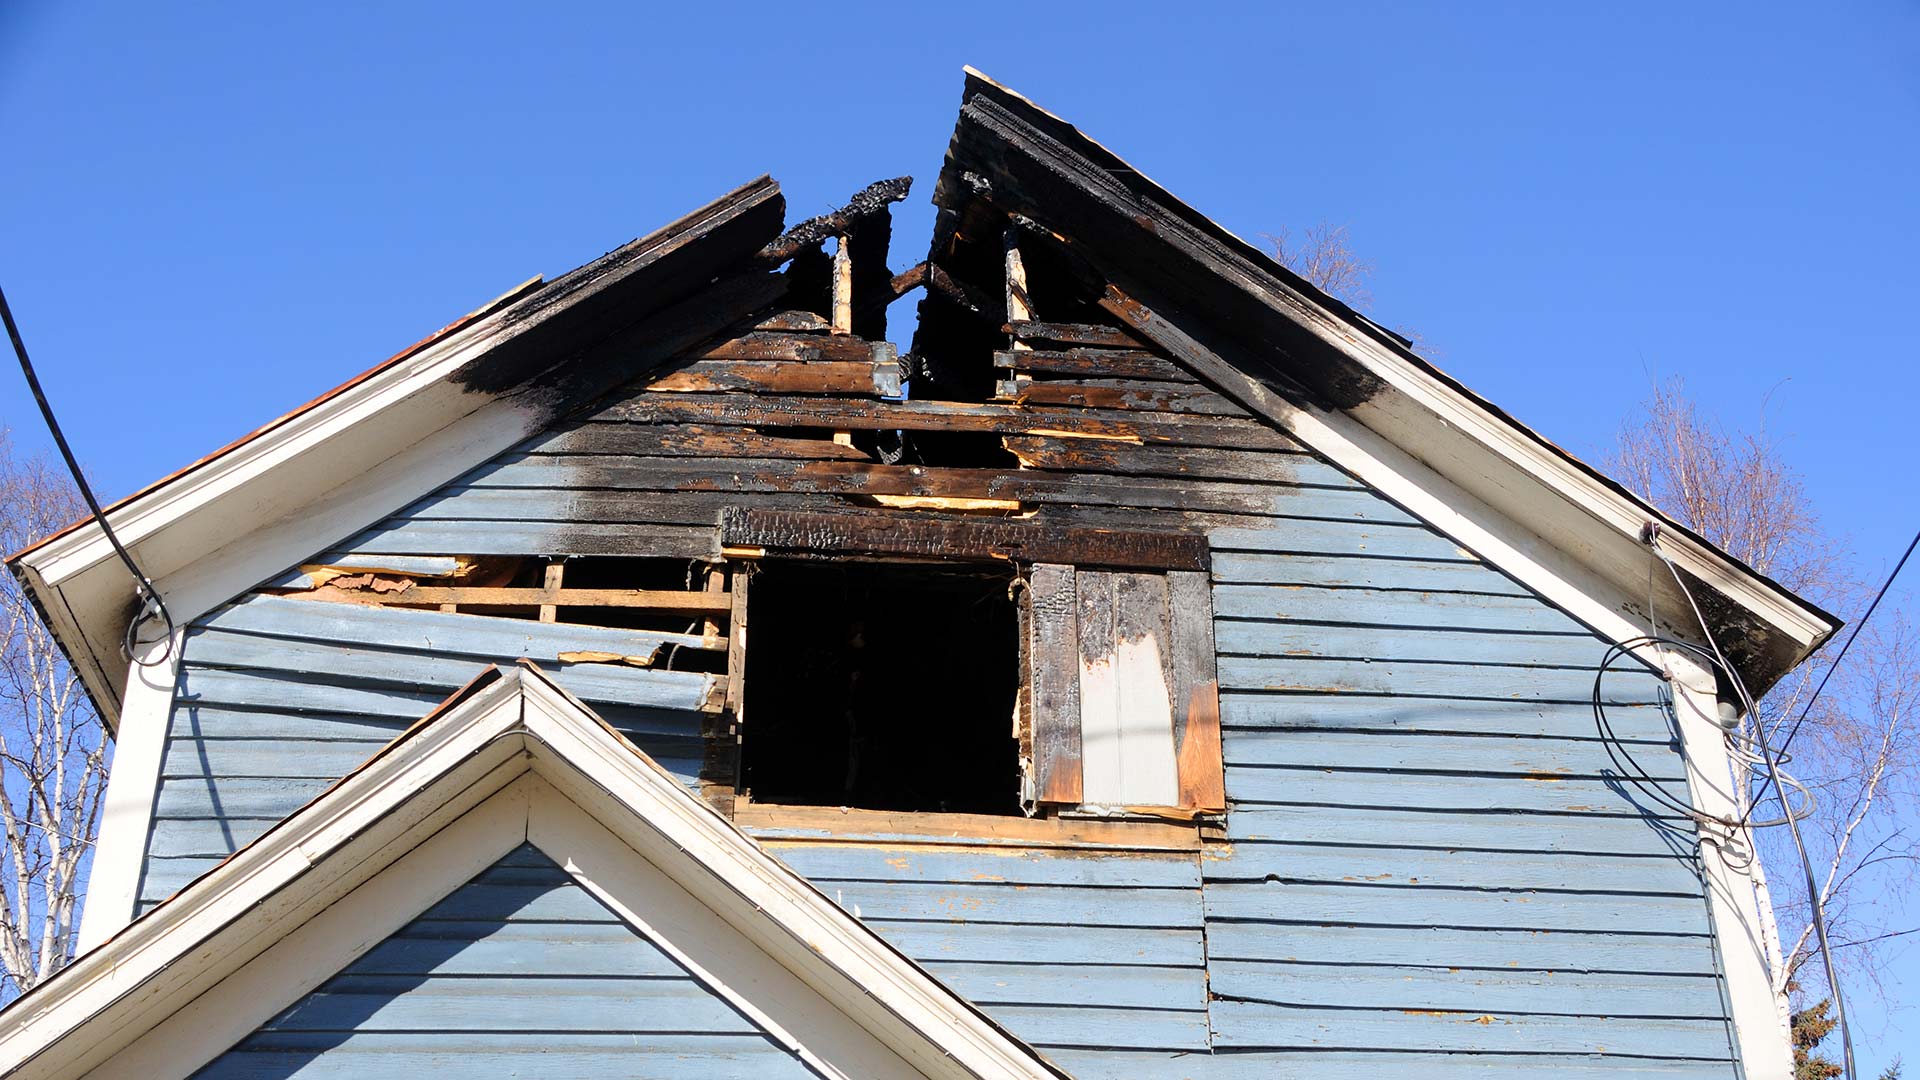 Fire Damage Guide: What to Do & Who to Call